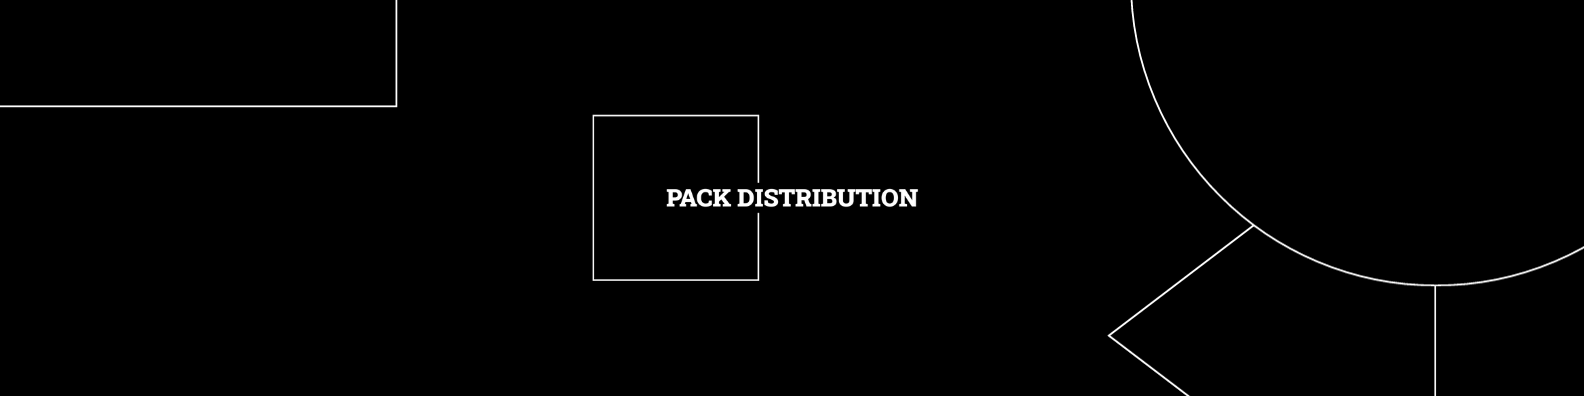 Pack Distribution featured image